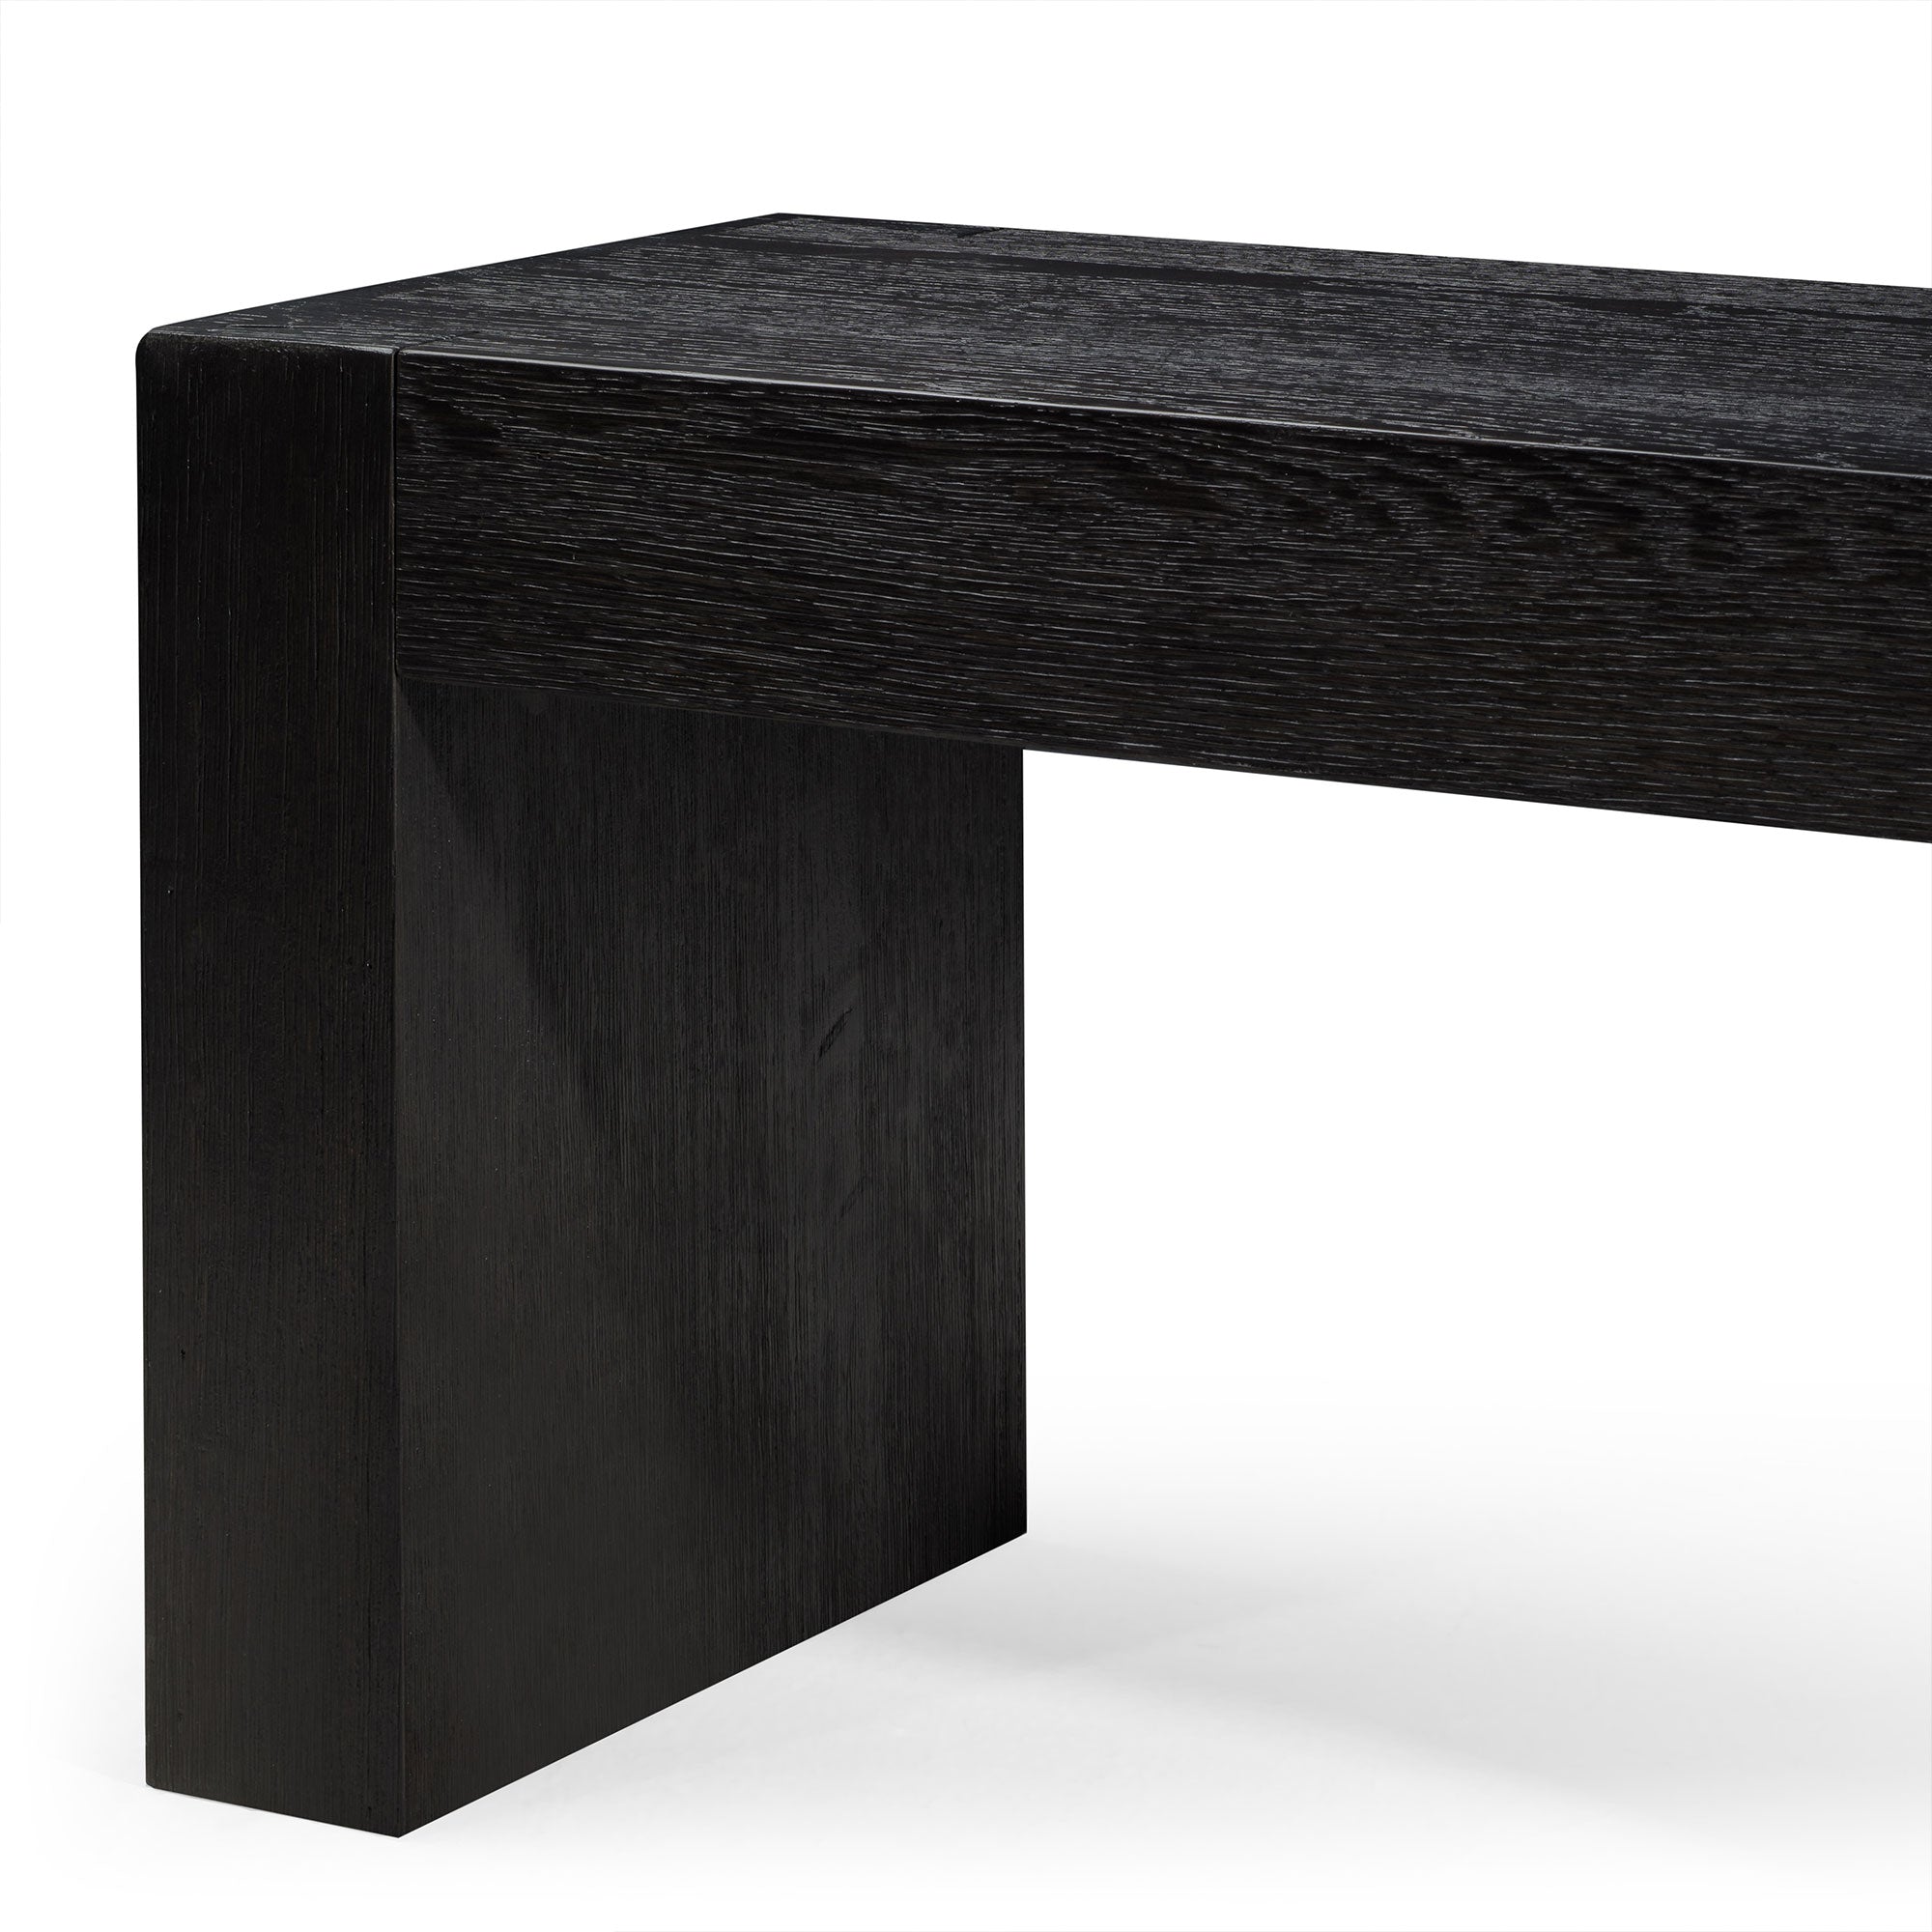 Zeno Organic Wooden Bench in Weathered Black Finish in Ottomans & Benches by Maven Lane